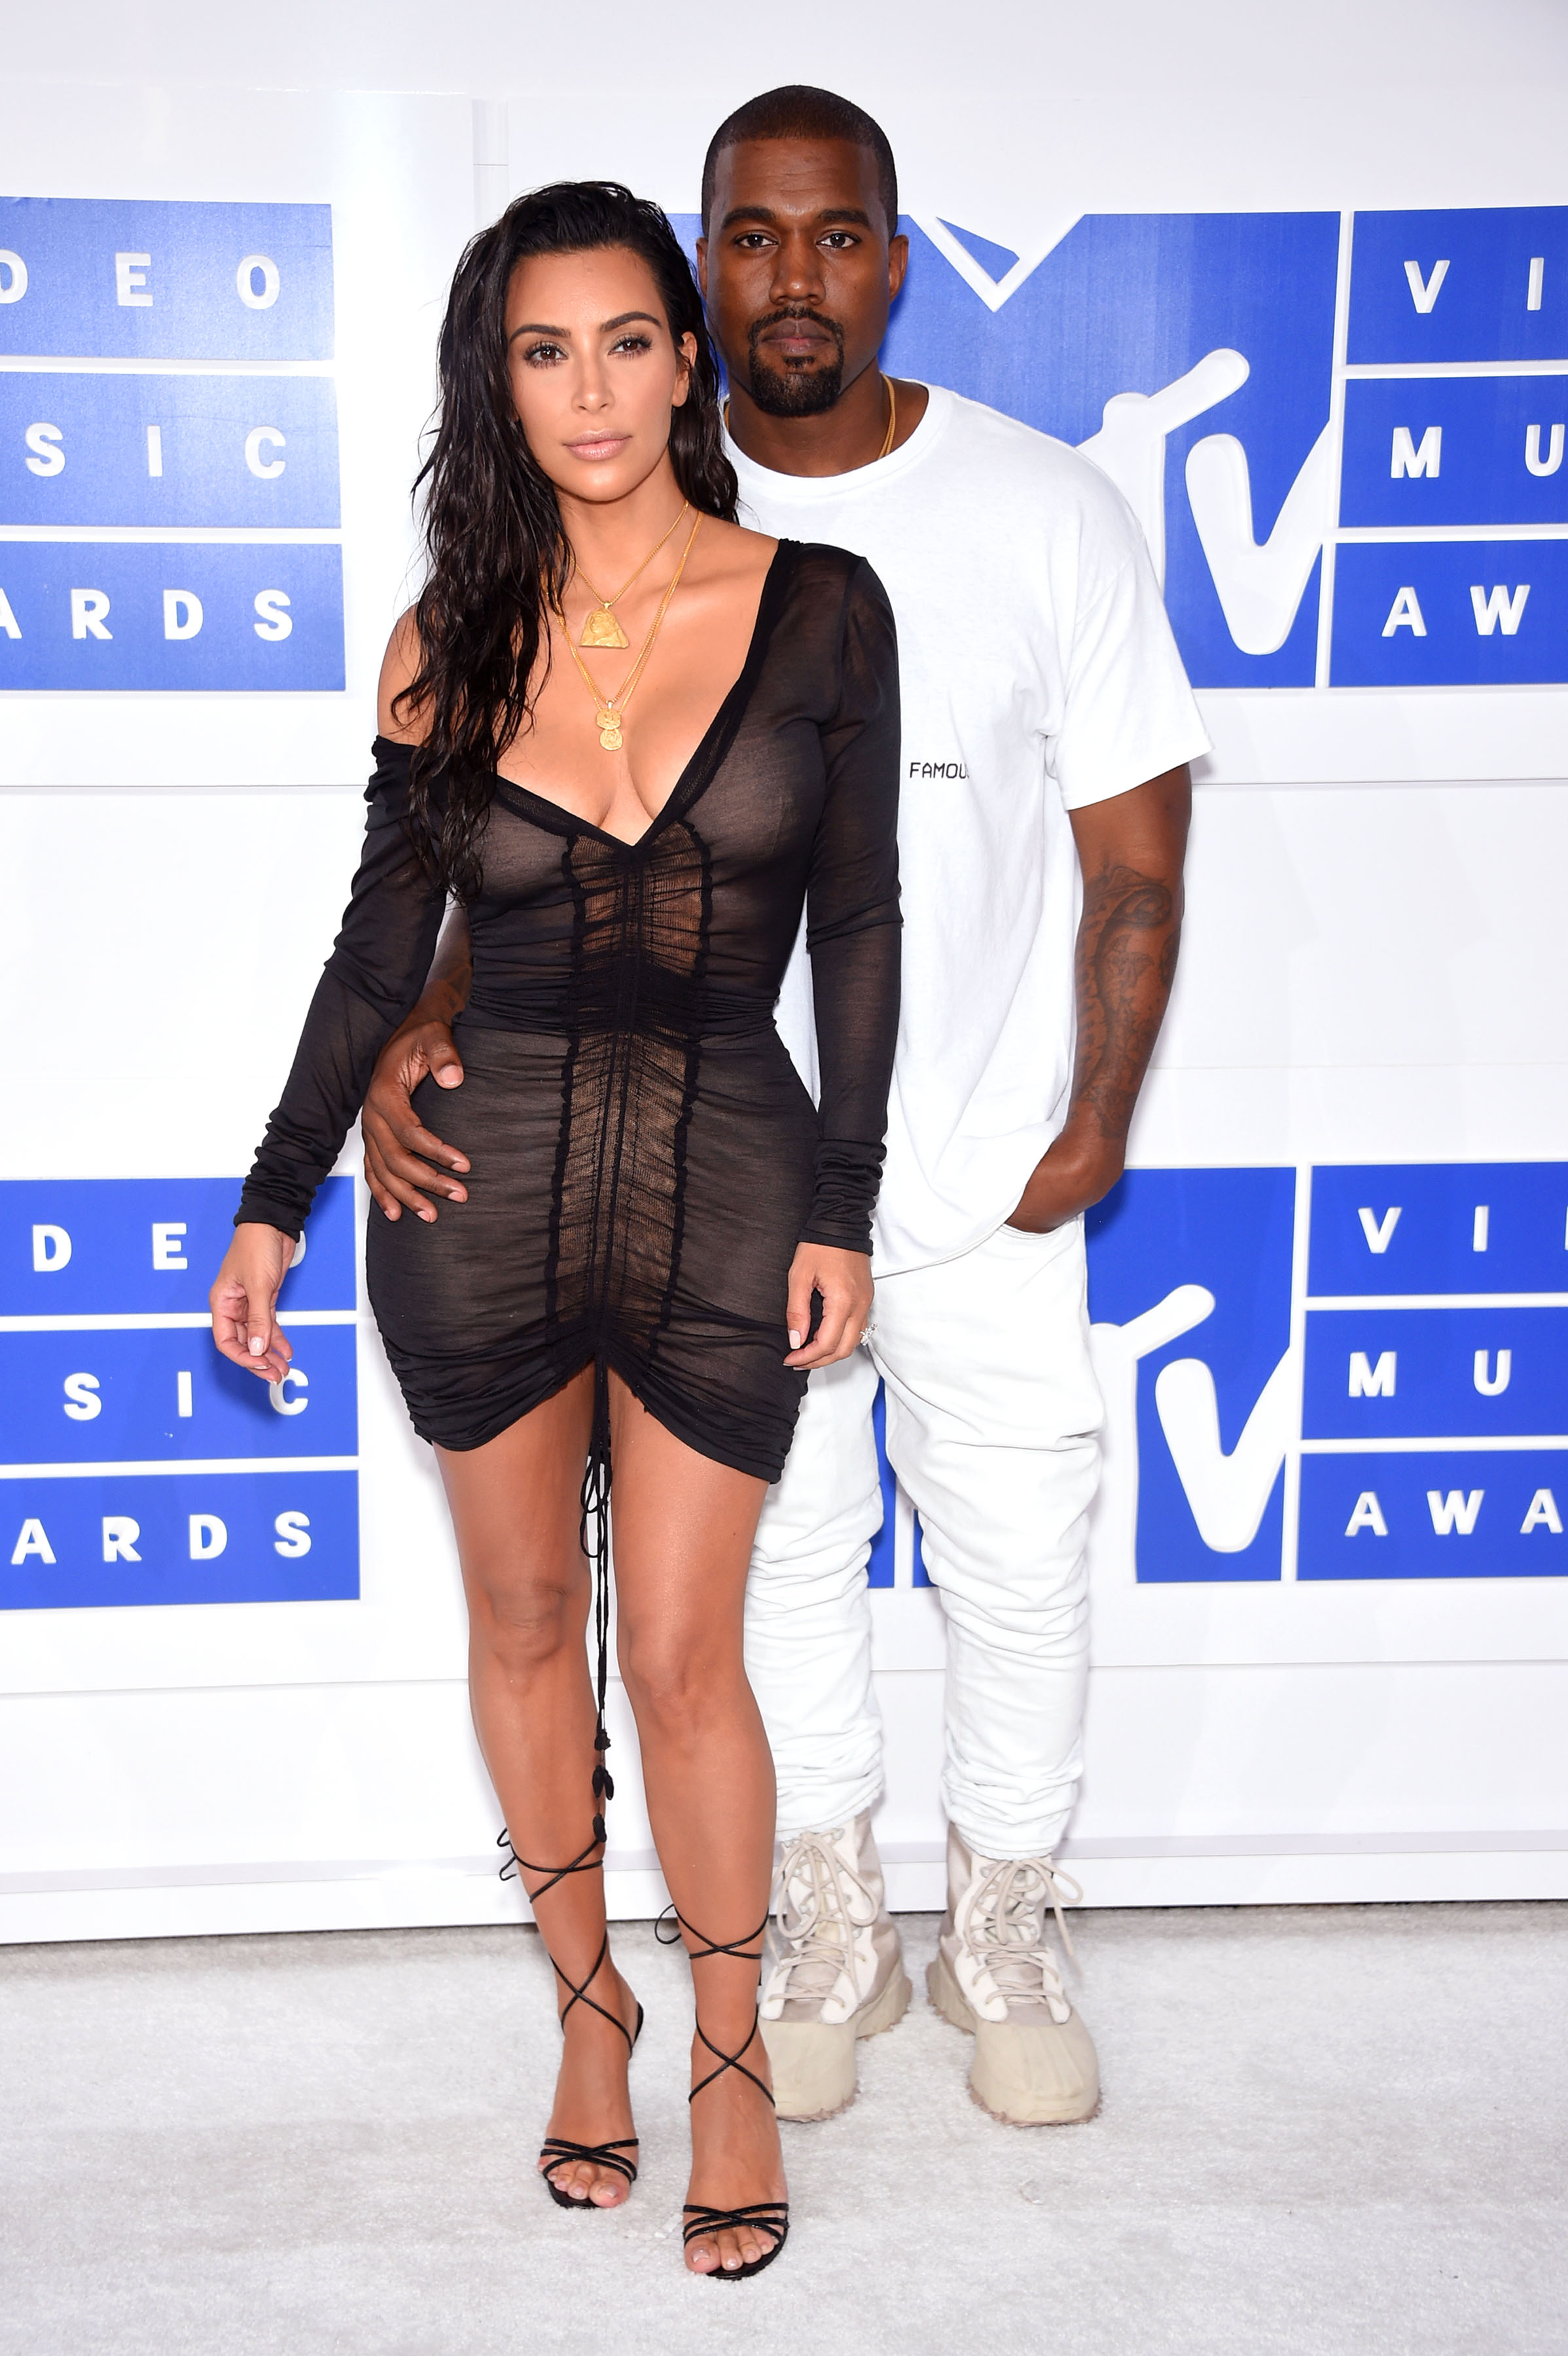 Kim Kardashian and Kanye West attend the 2016 MTV Video Music Awards at Madison Square Garden on Aug. 28, 2016 in New York City.